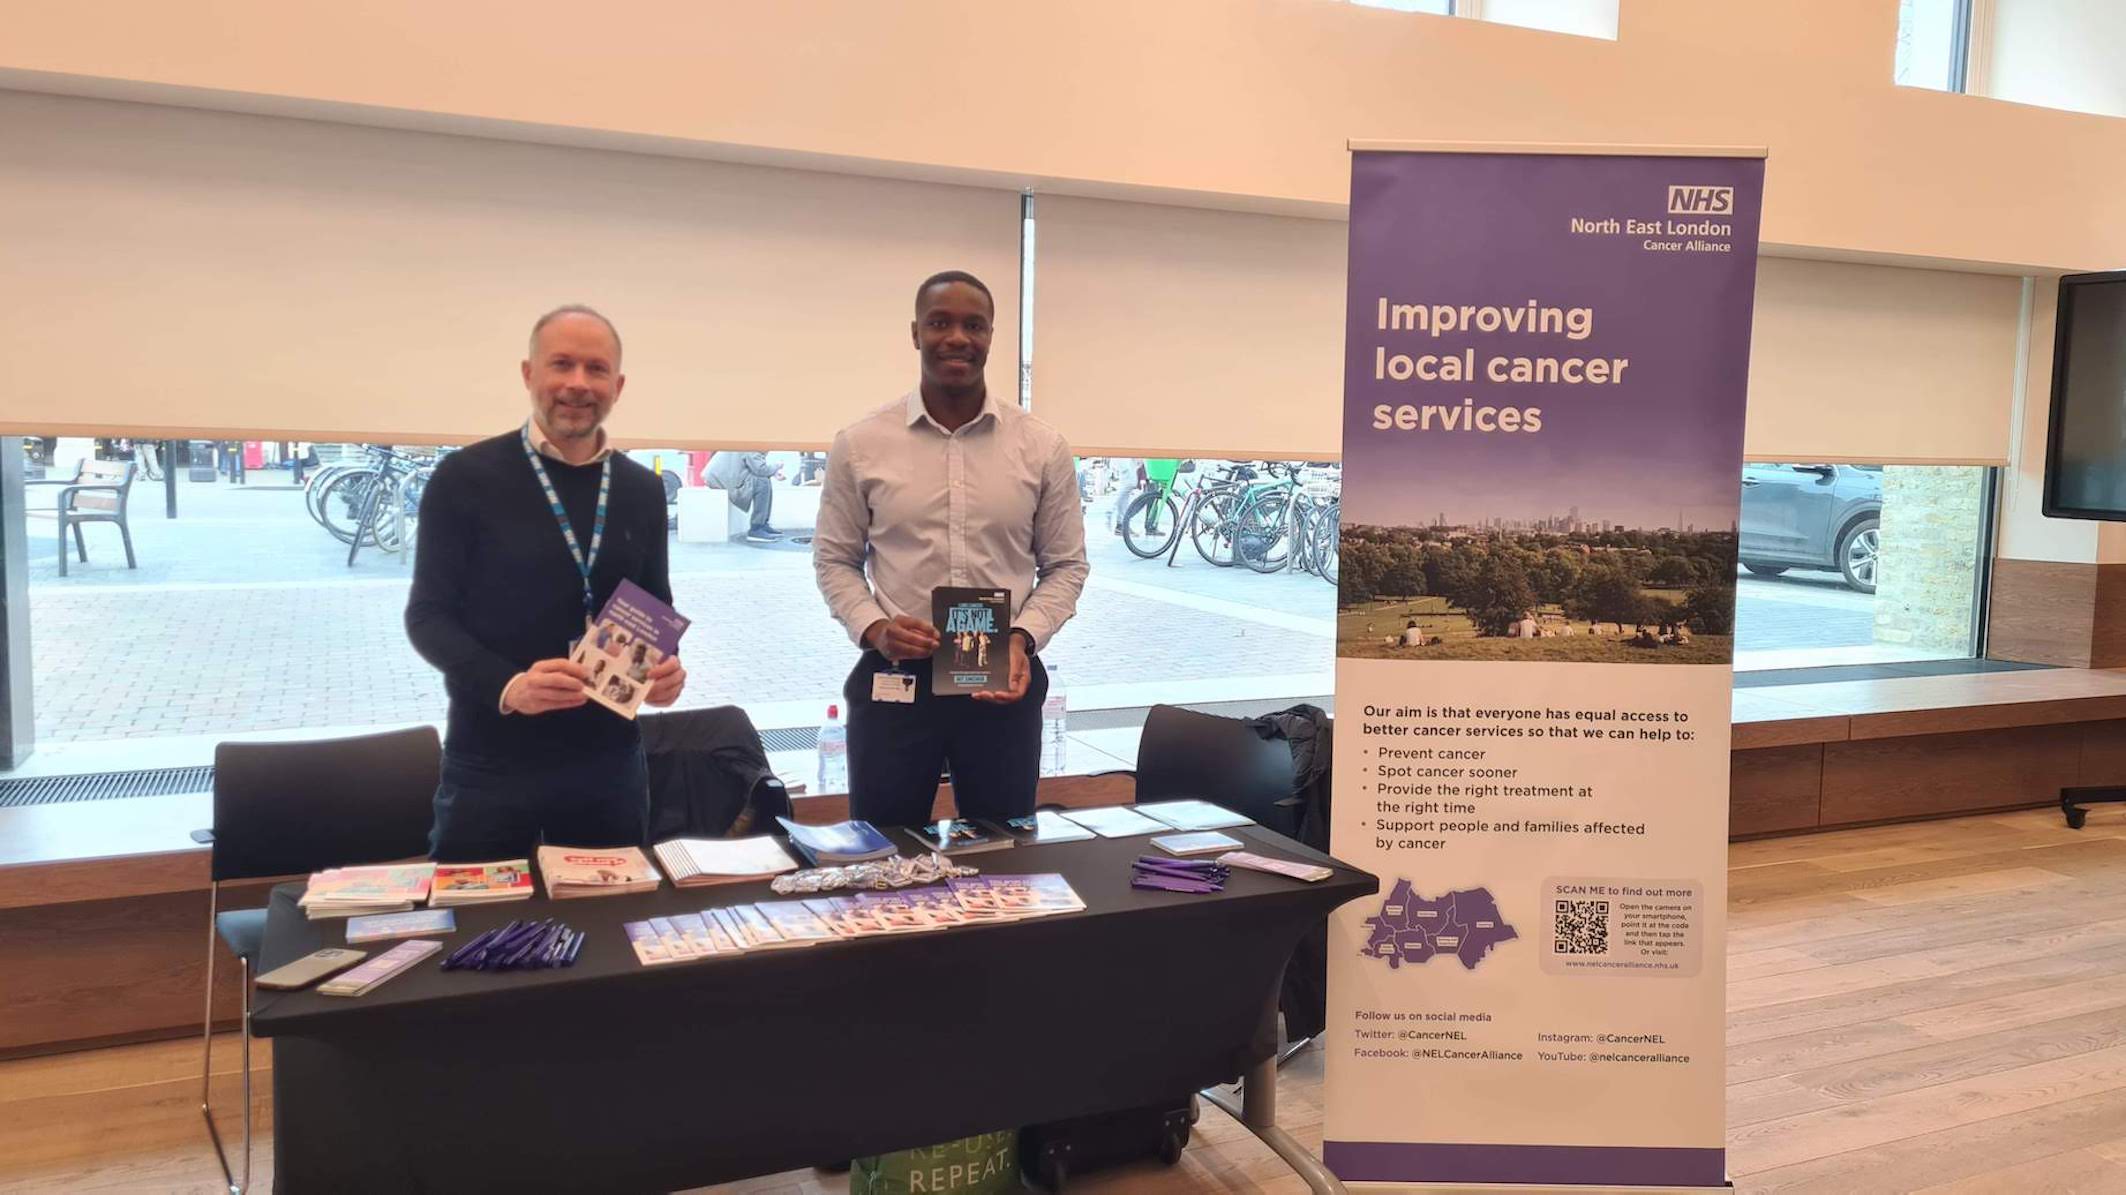 Two men are standing in front of a cancer awareness stand which has patient leaflets on it.  A pop up banner says 'Improving Local Cancer Services' on it.